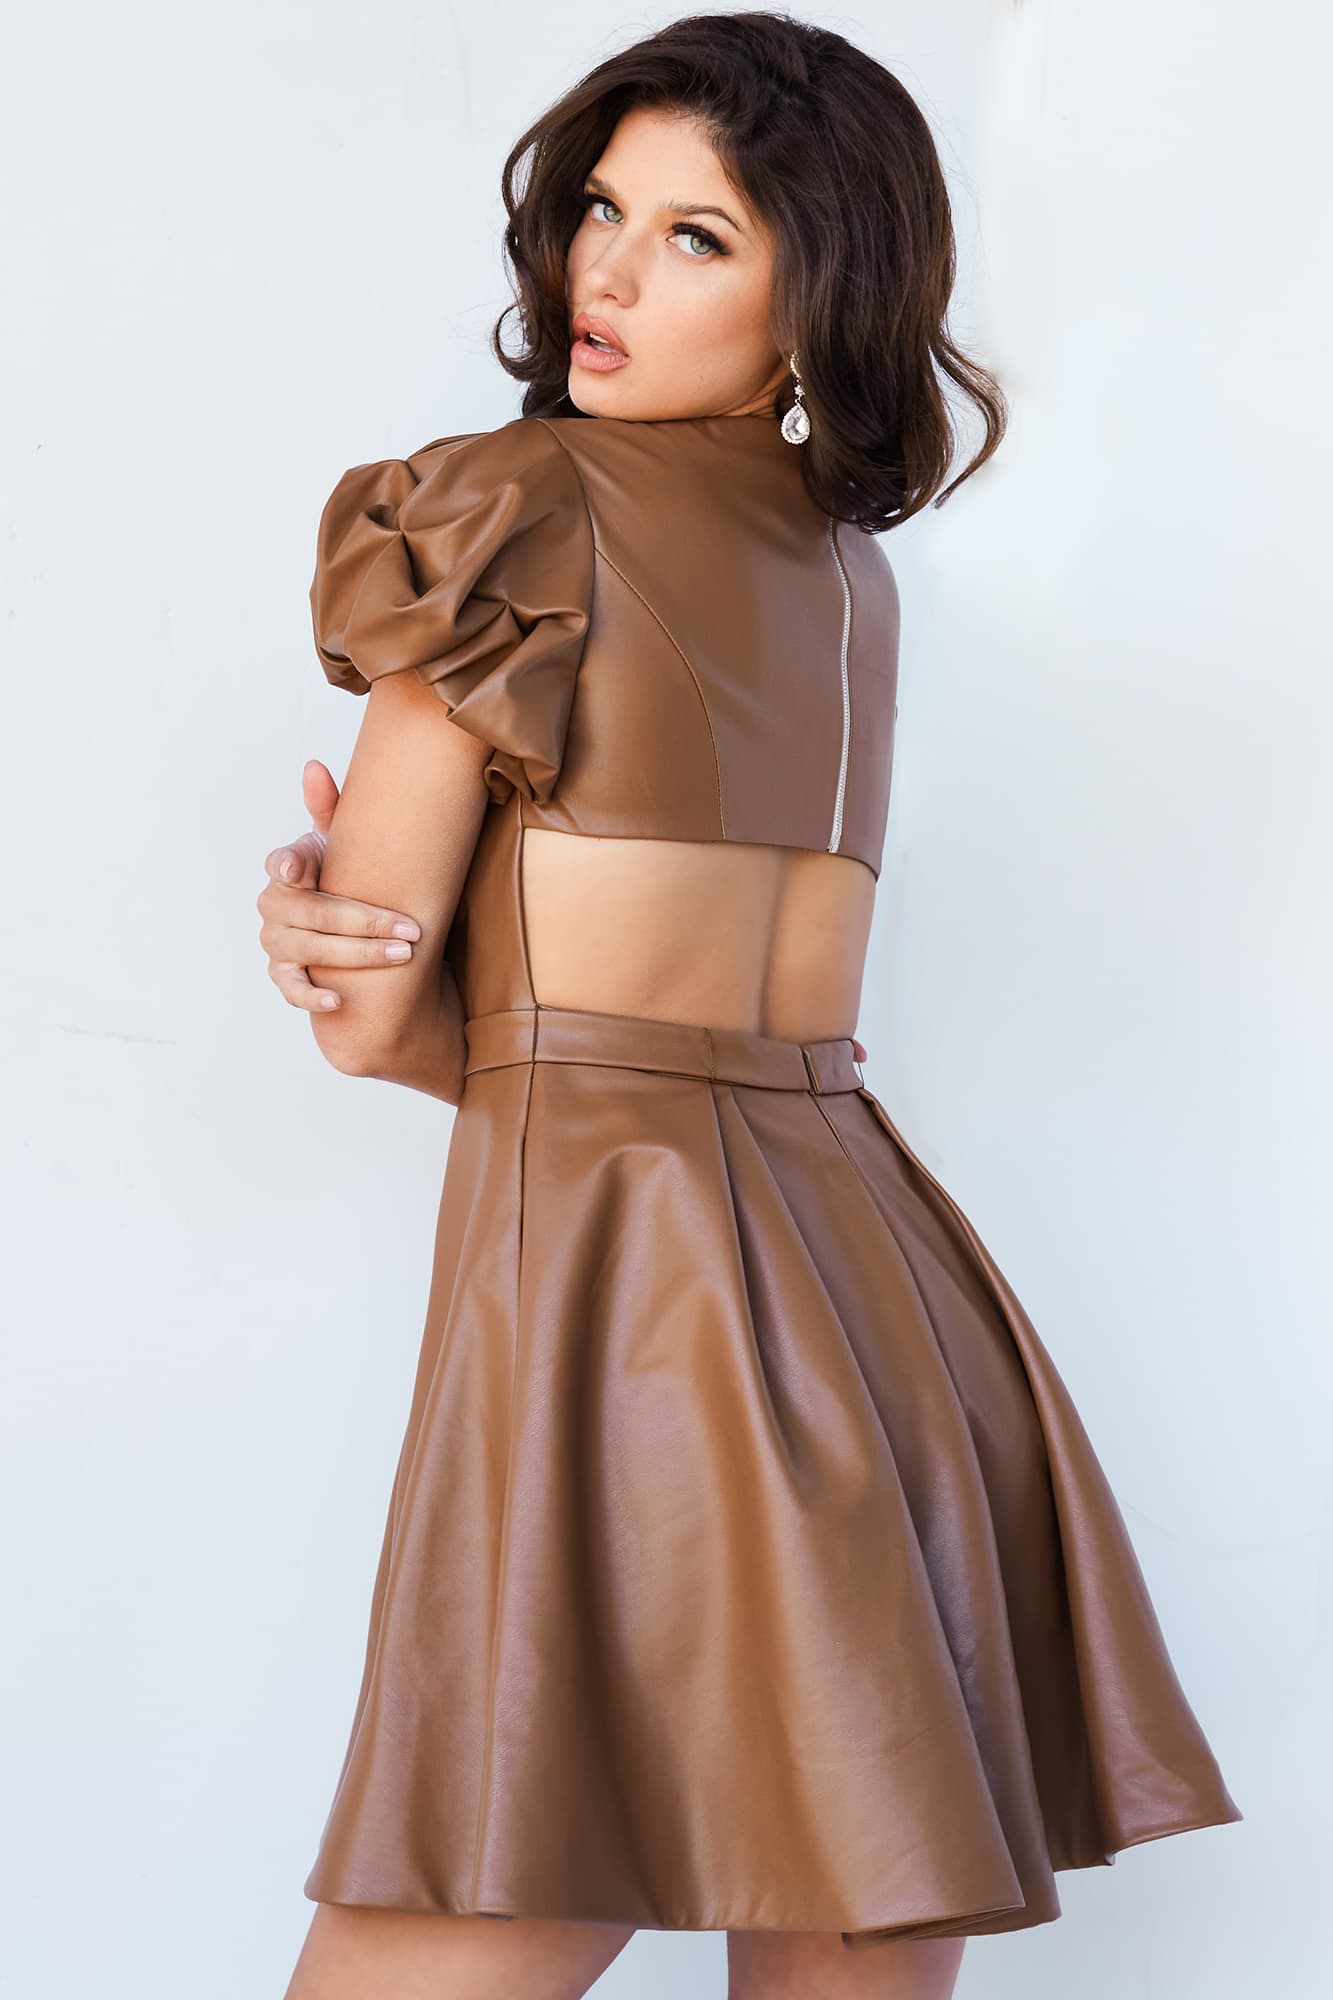 Jovani 09690 Short Fit & Flare Pleather Cutout Back Puff Sleeve Formal Cocktail Dress Interview This Jovani 09690 caramel cocktail dress features an A-line silhouette in premium pleather, with a square neckline, puff sleeves, and a lower back cutout.  Available Sizes: 00,0,2,4,6,8,10,12,14,16,18,20,22,24  Available Colors: Black, Caramel, Olive